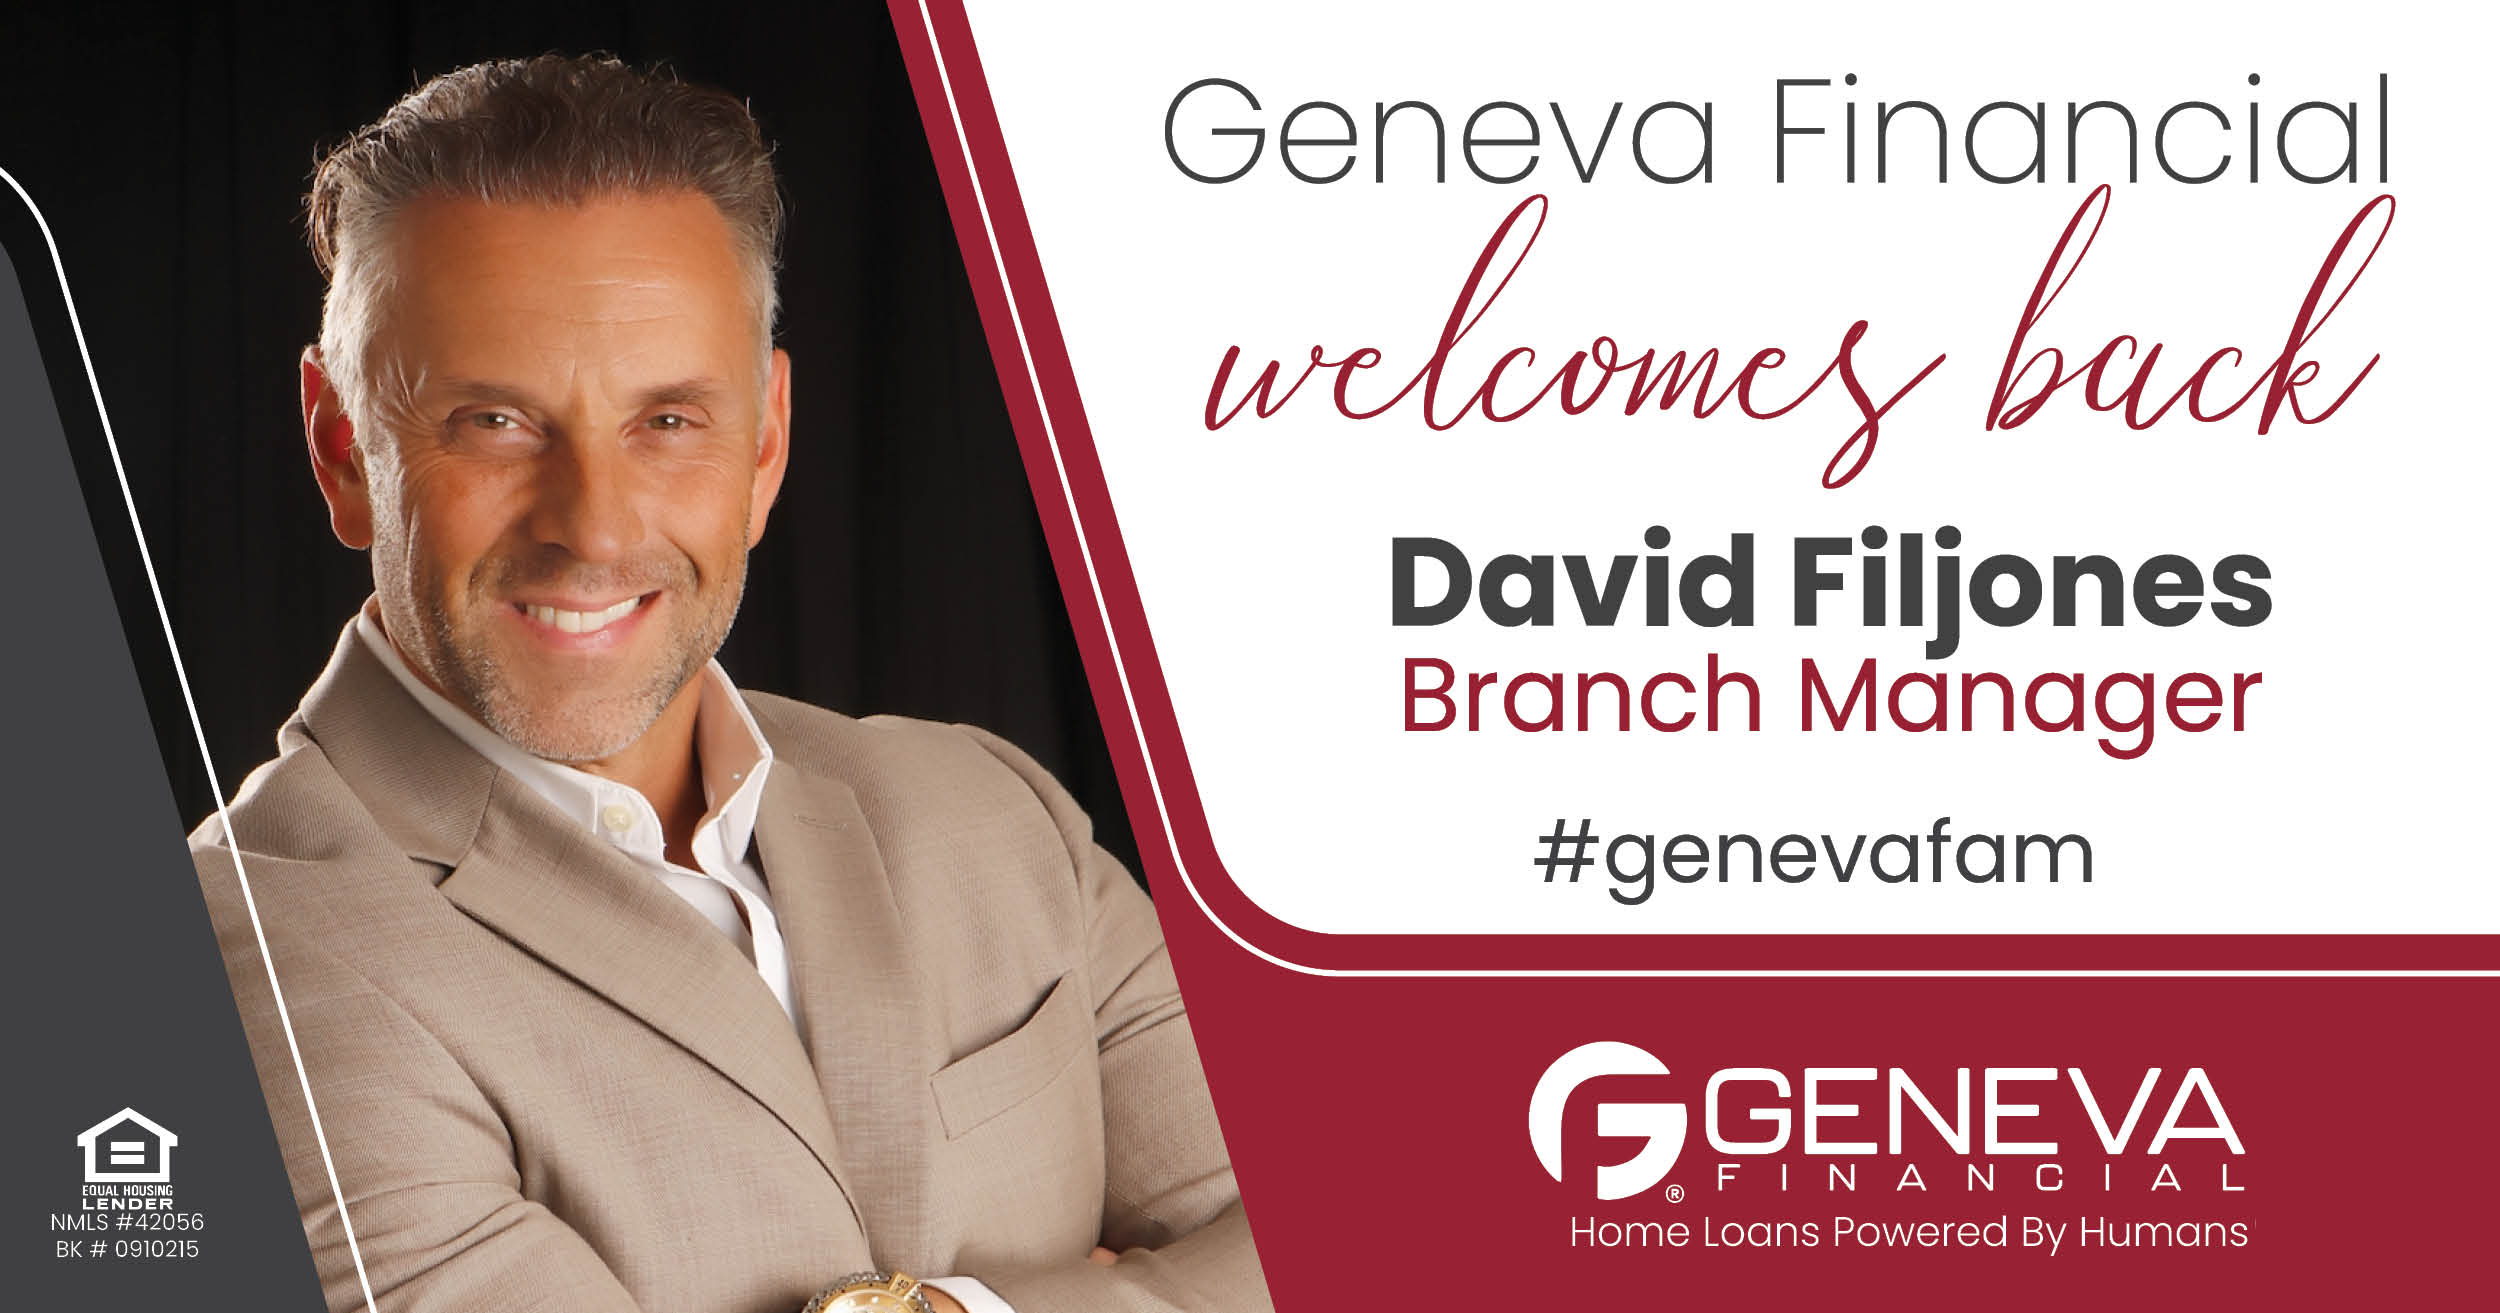 Geneva Financial Welcomes Back Branch Manager David Filjones to Lake Worth, FL – Home Loans Powered by Humans®.